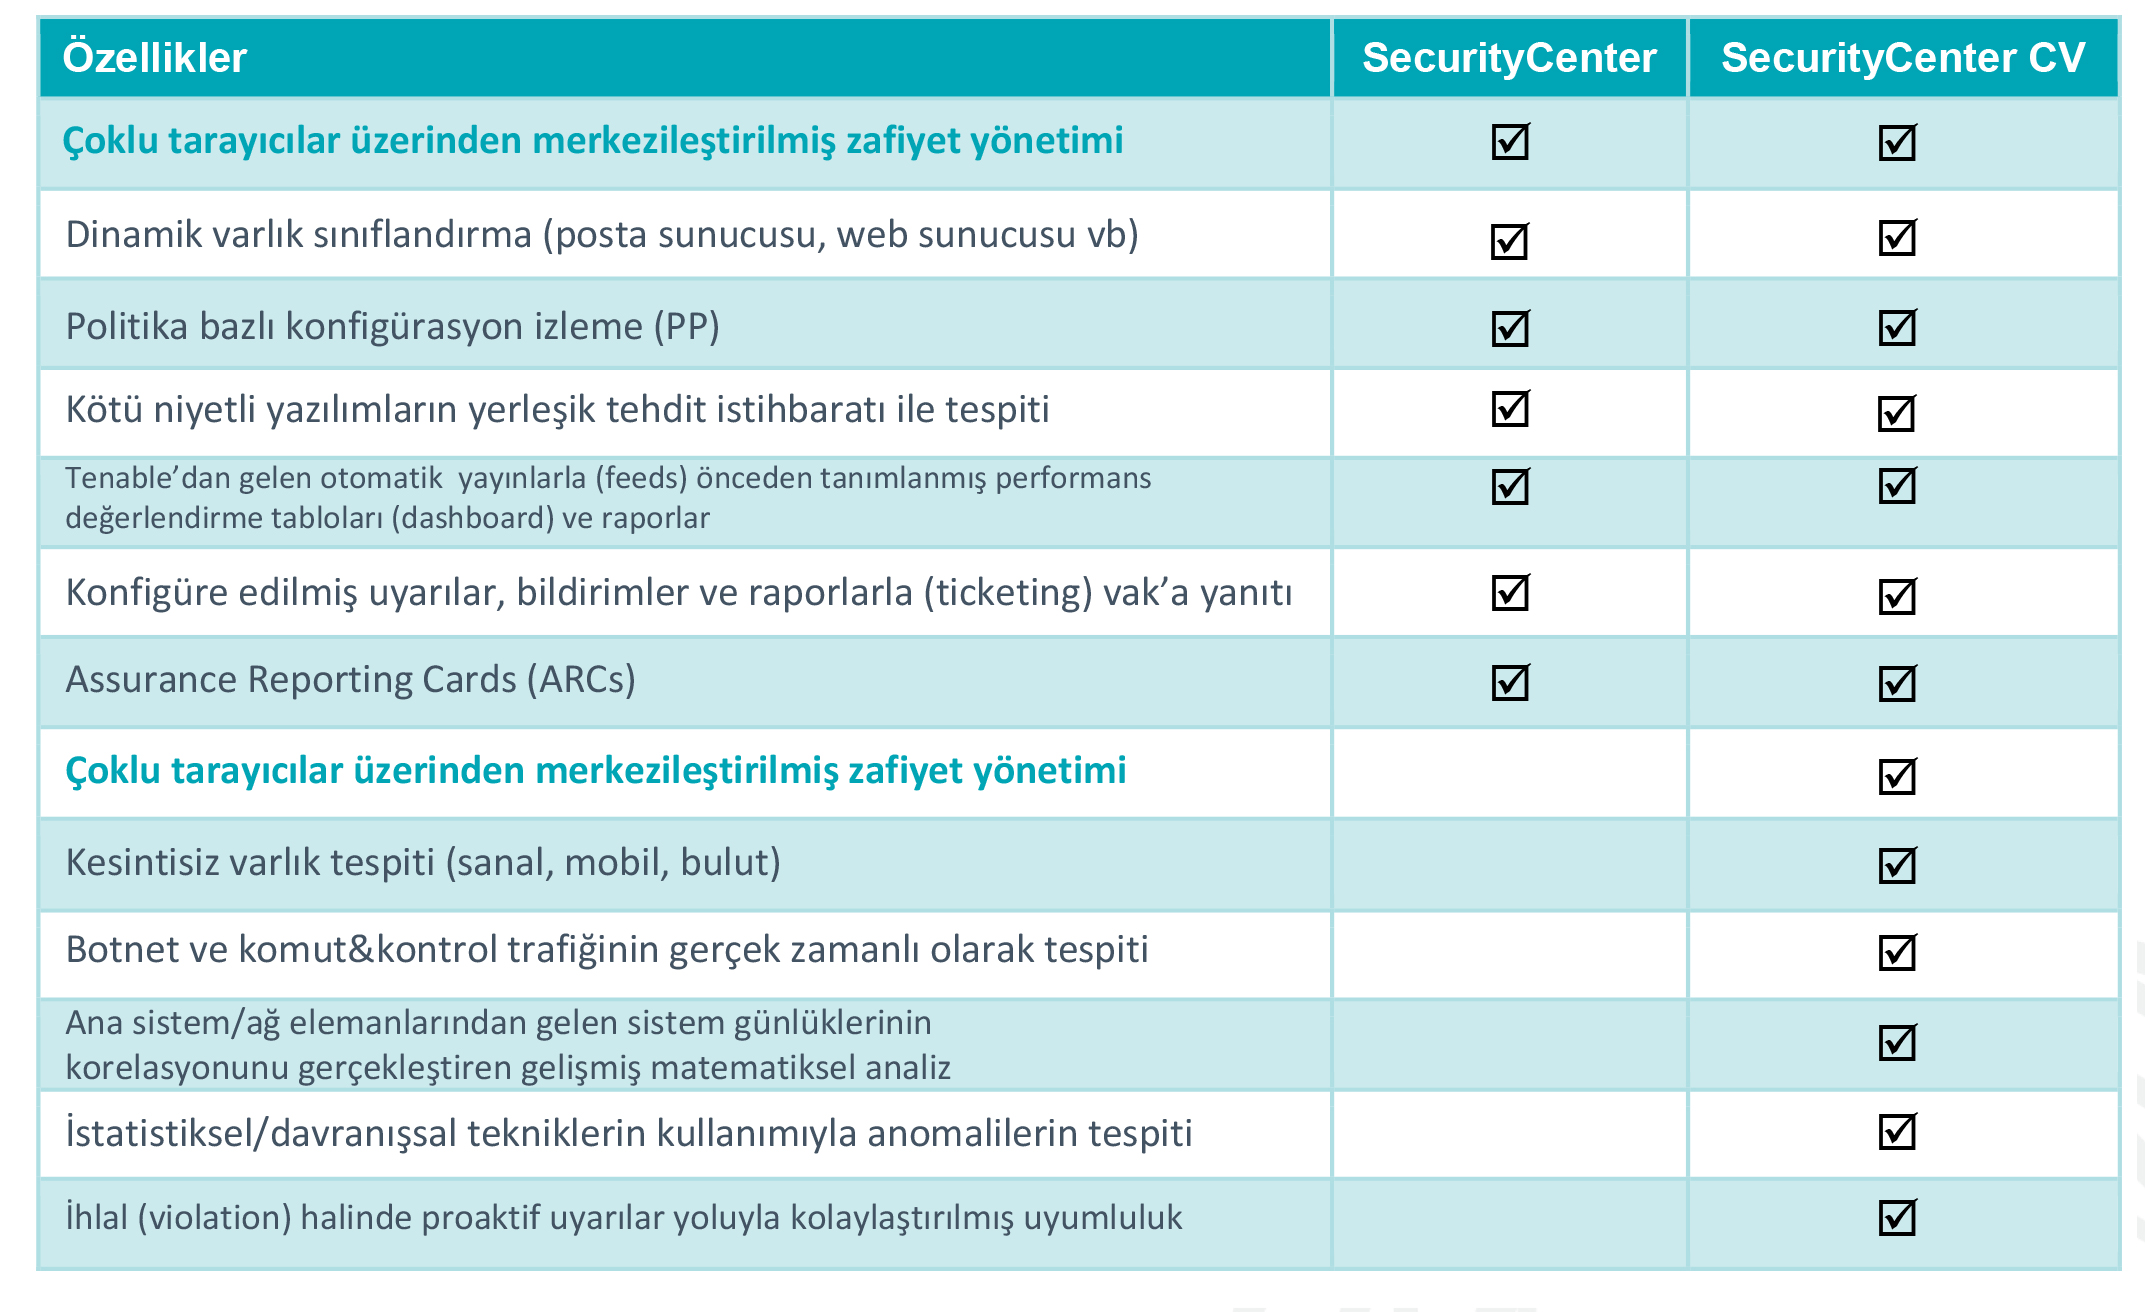 tenable securityCenter1